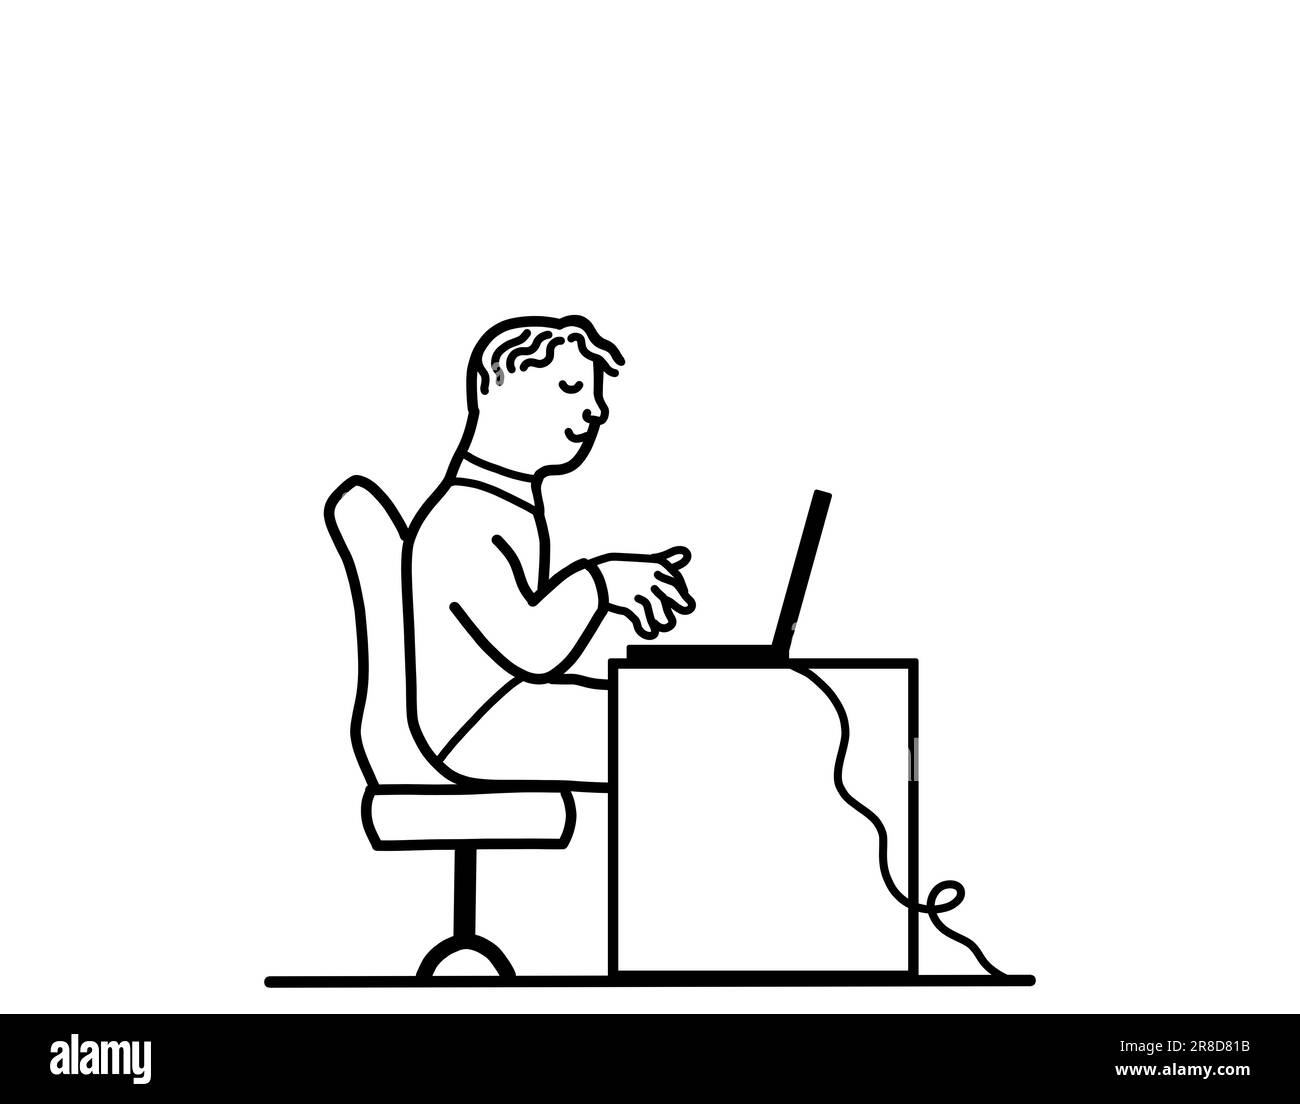 A young adult man working on laptop computer. Online business job occupation concept. Black and white outline drawing with copy space. Stock Photo